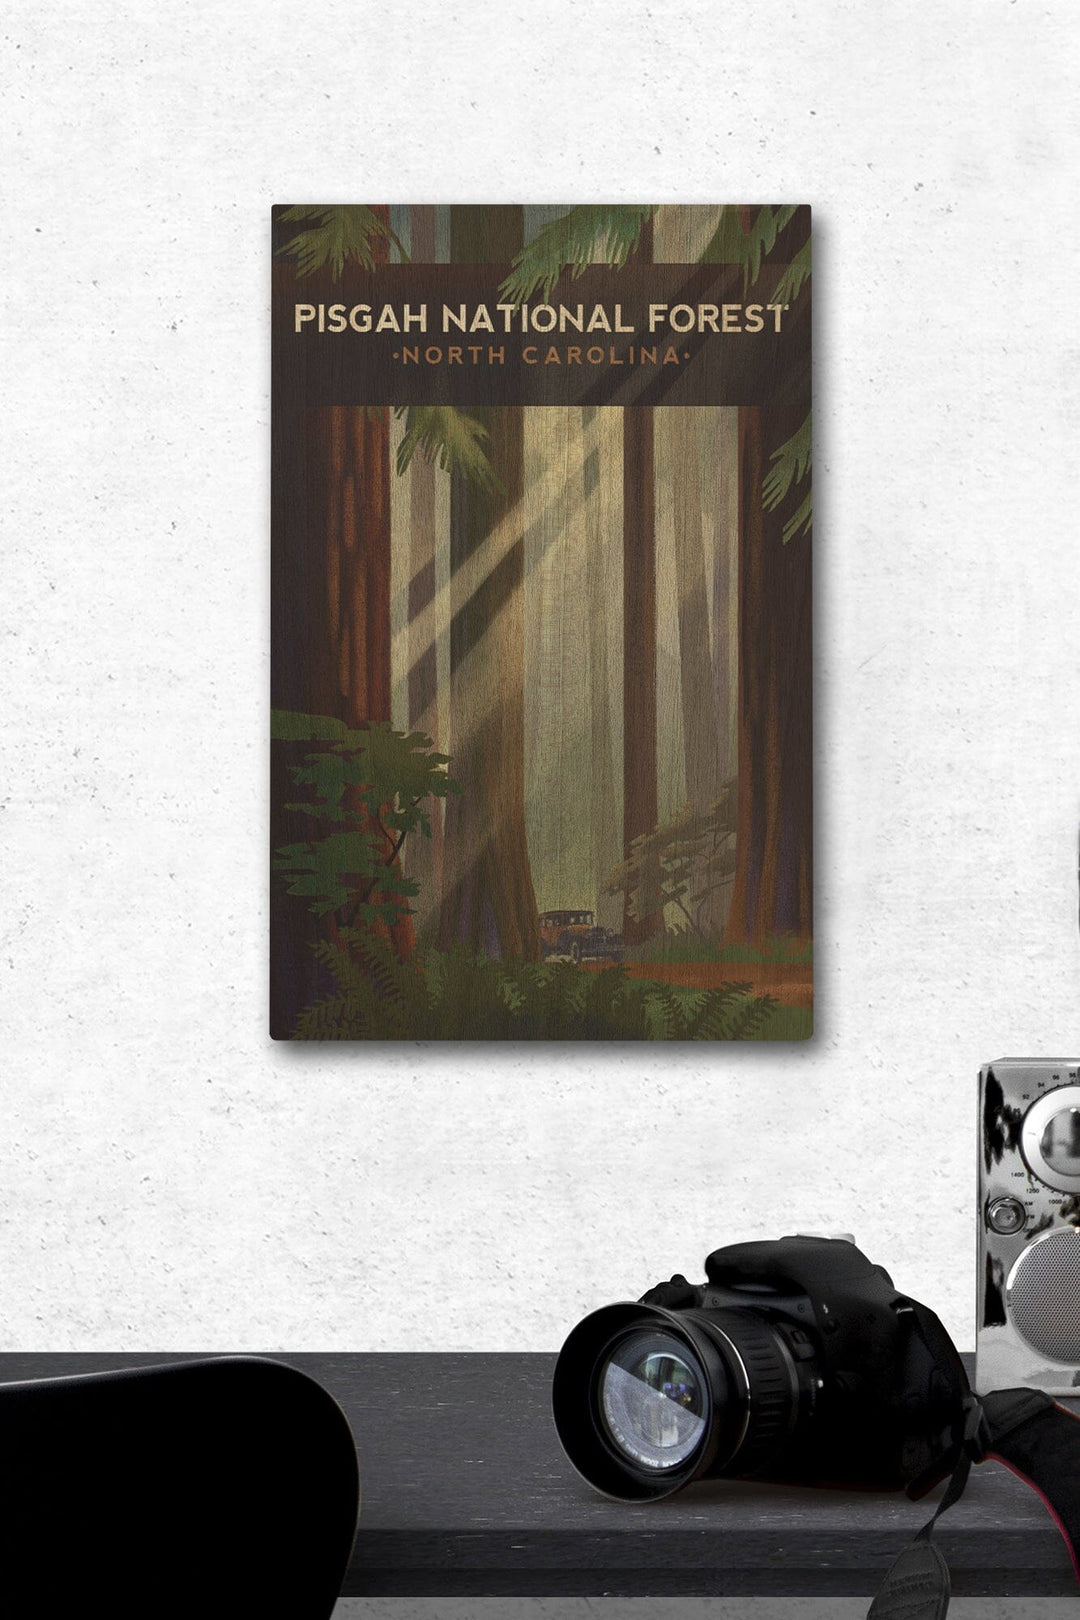 Pisgah National Forest, North Carolina, Redwood Forest, Lithograph, Lantern Press Artwork, Wood Signs and Postcards Wood Lantern Press 12 x 18 Wood Gallery Print 